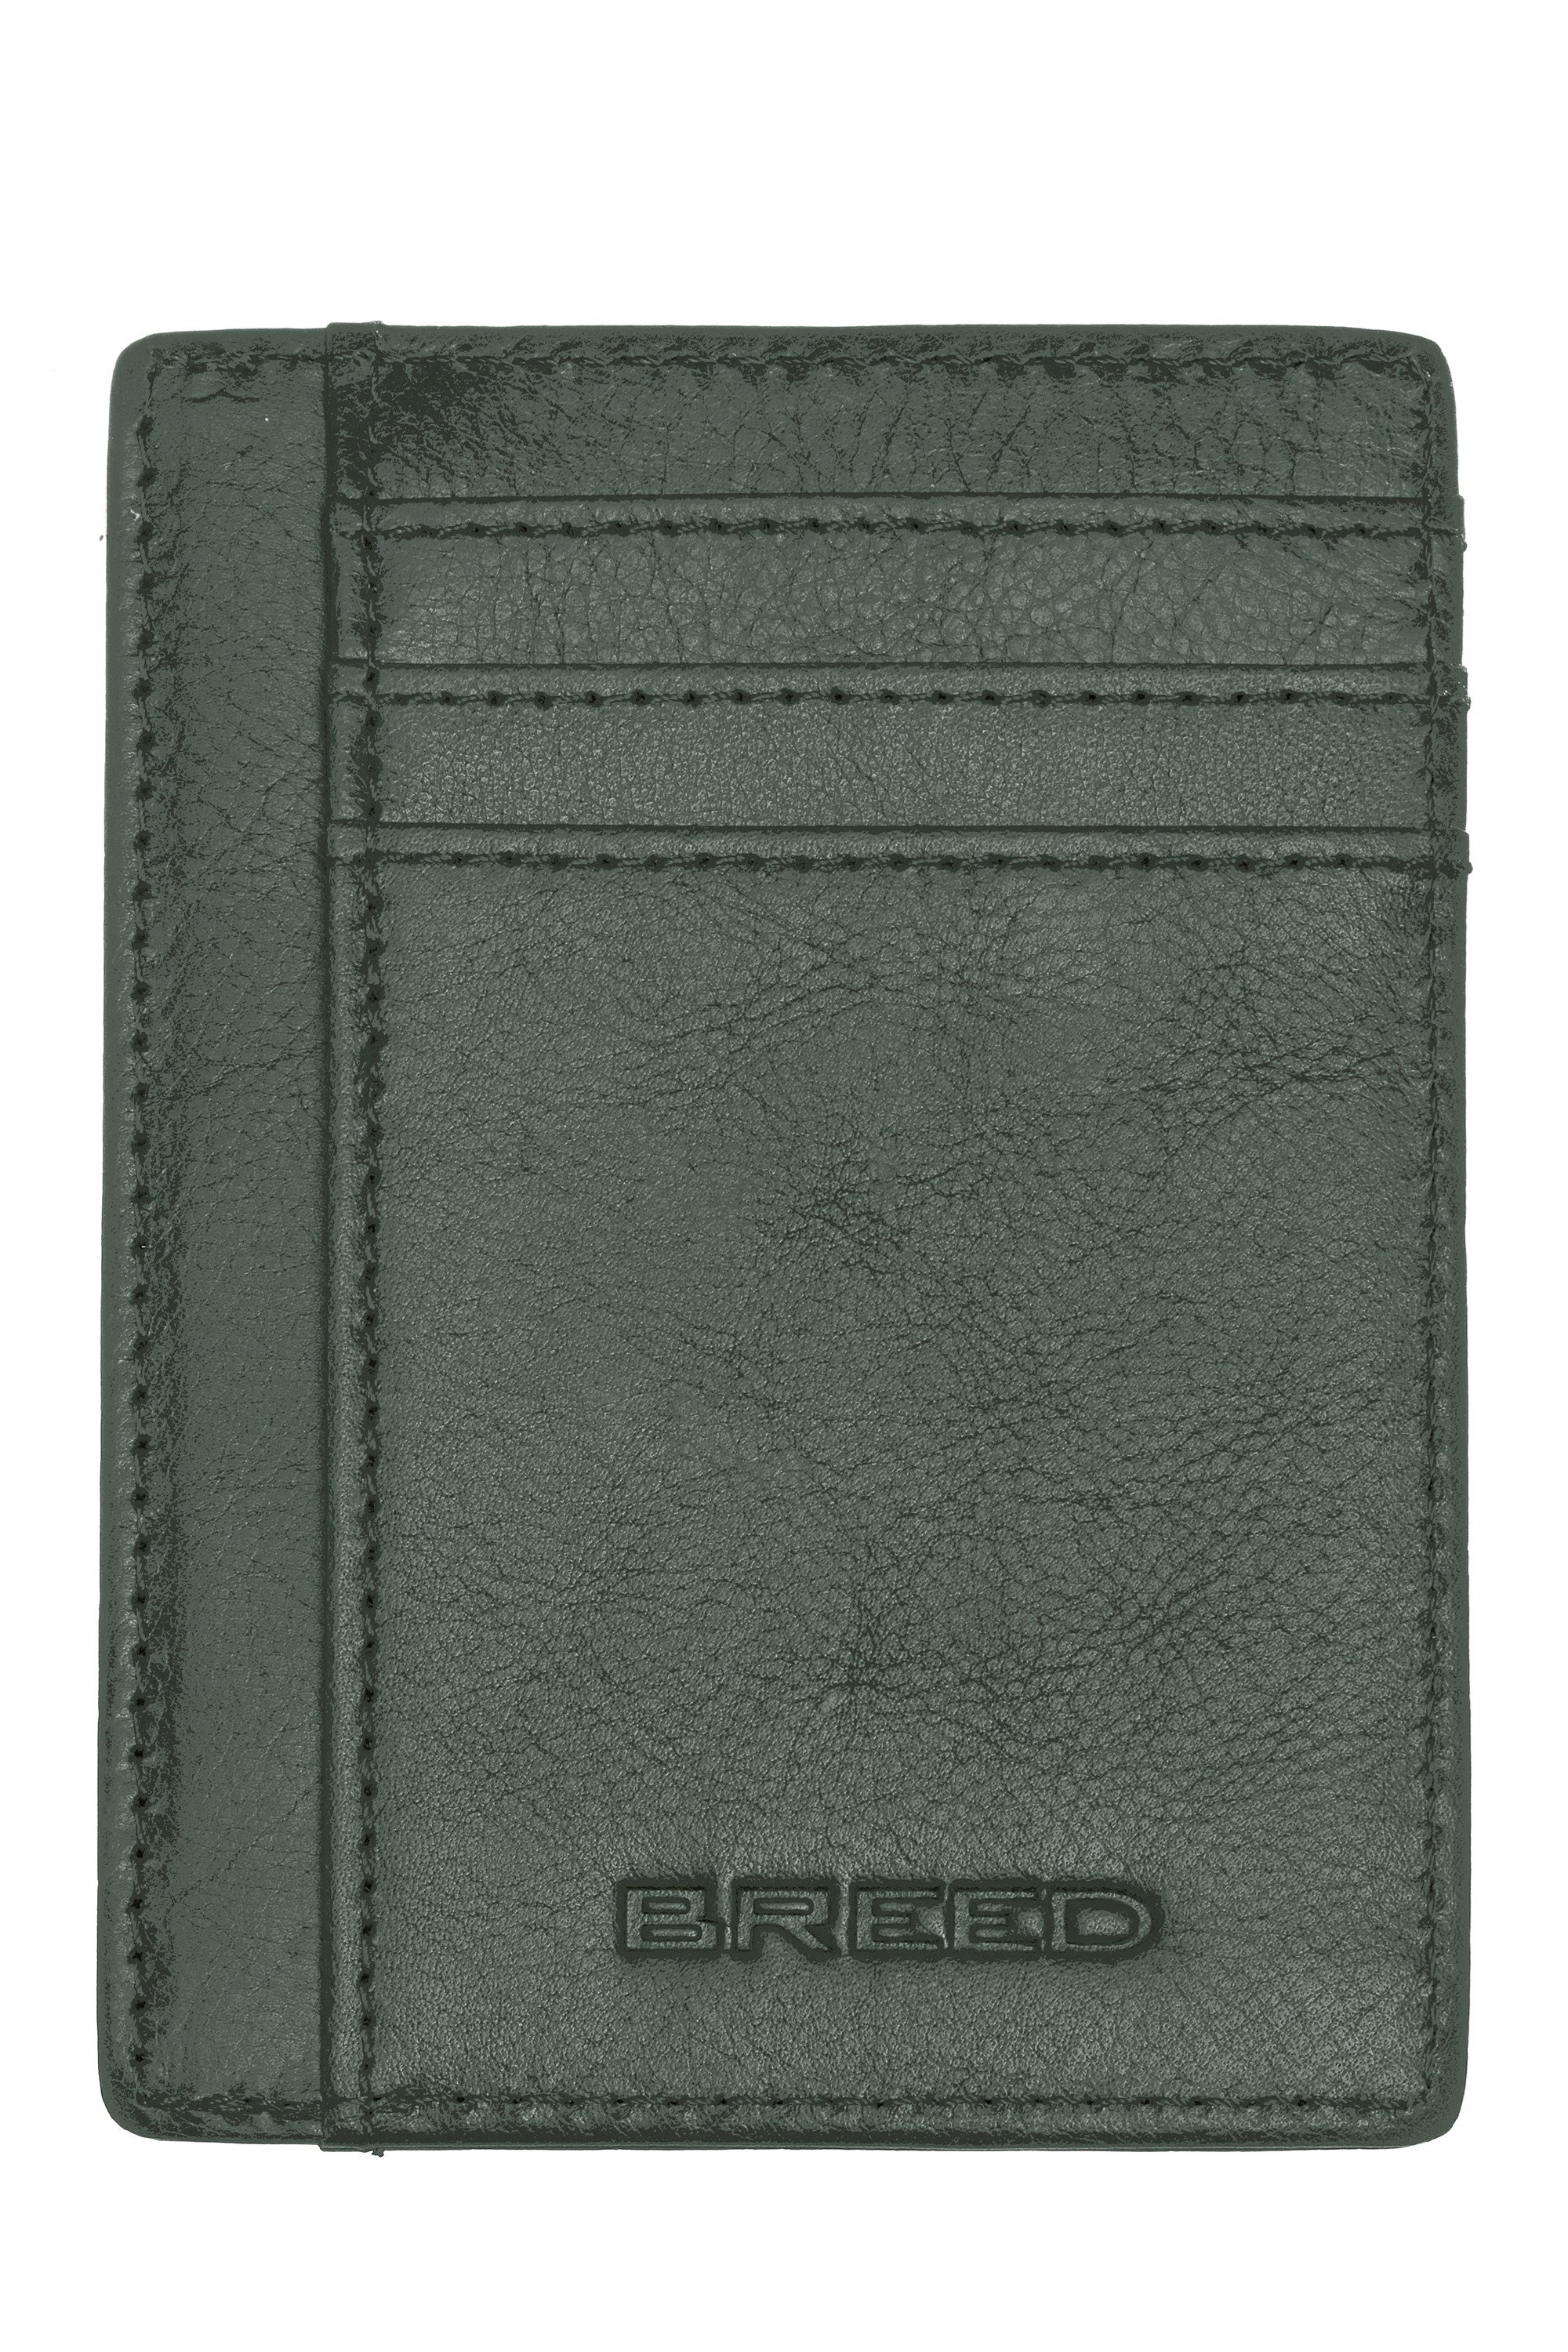 Chase Genuine Leather Front Pocket Wallet -